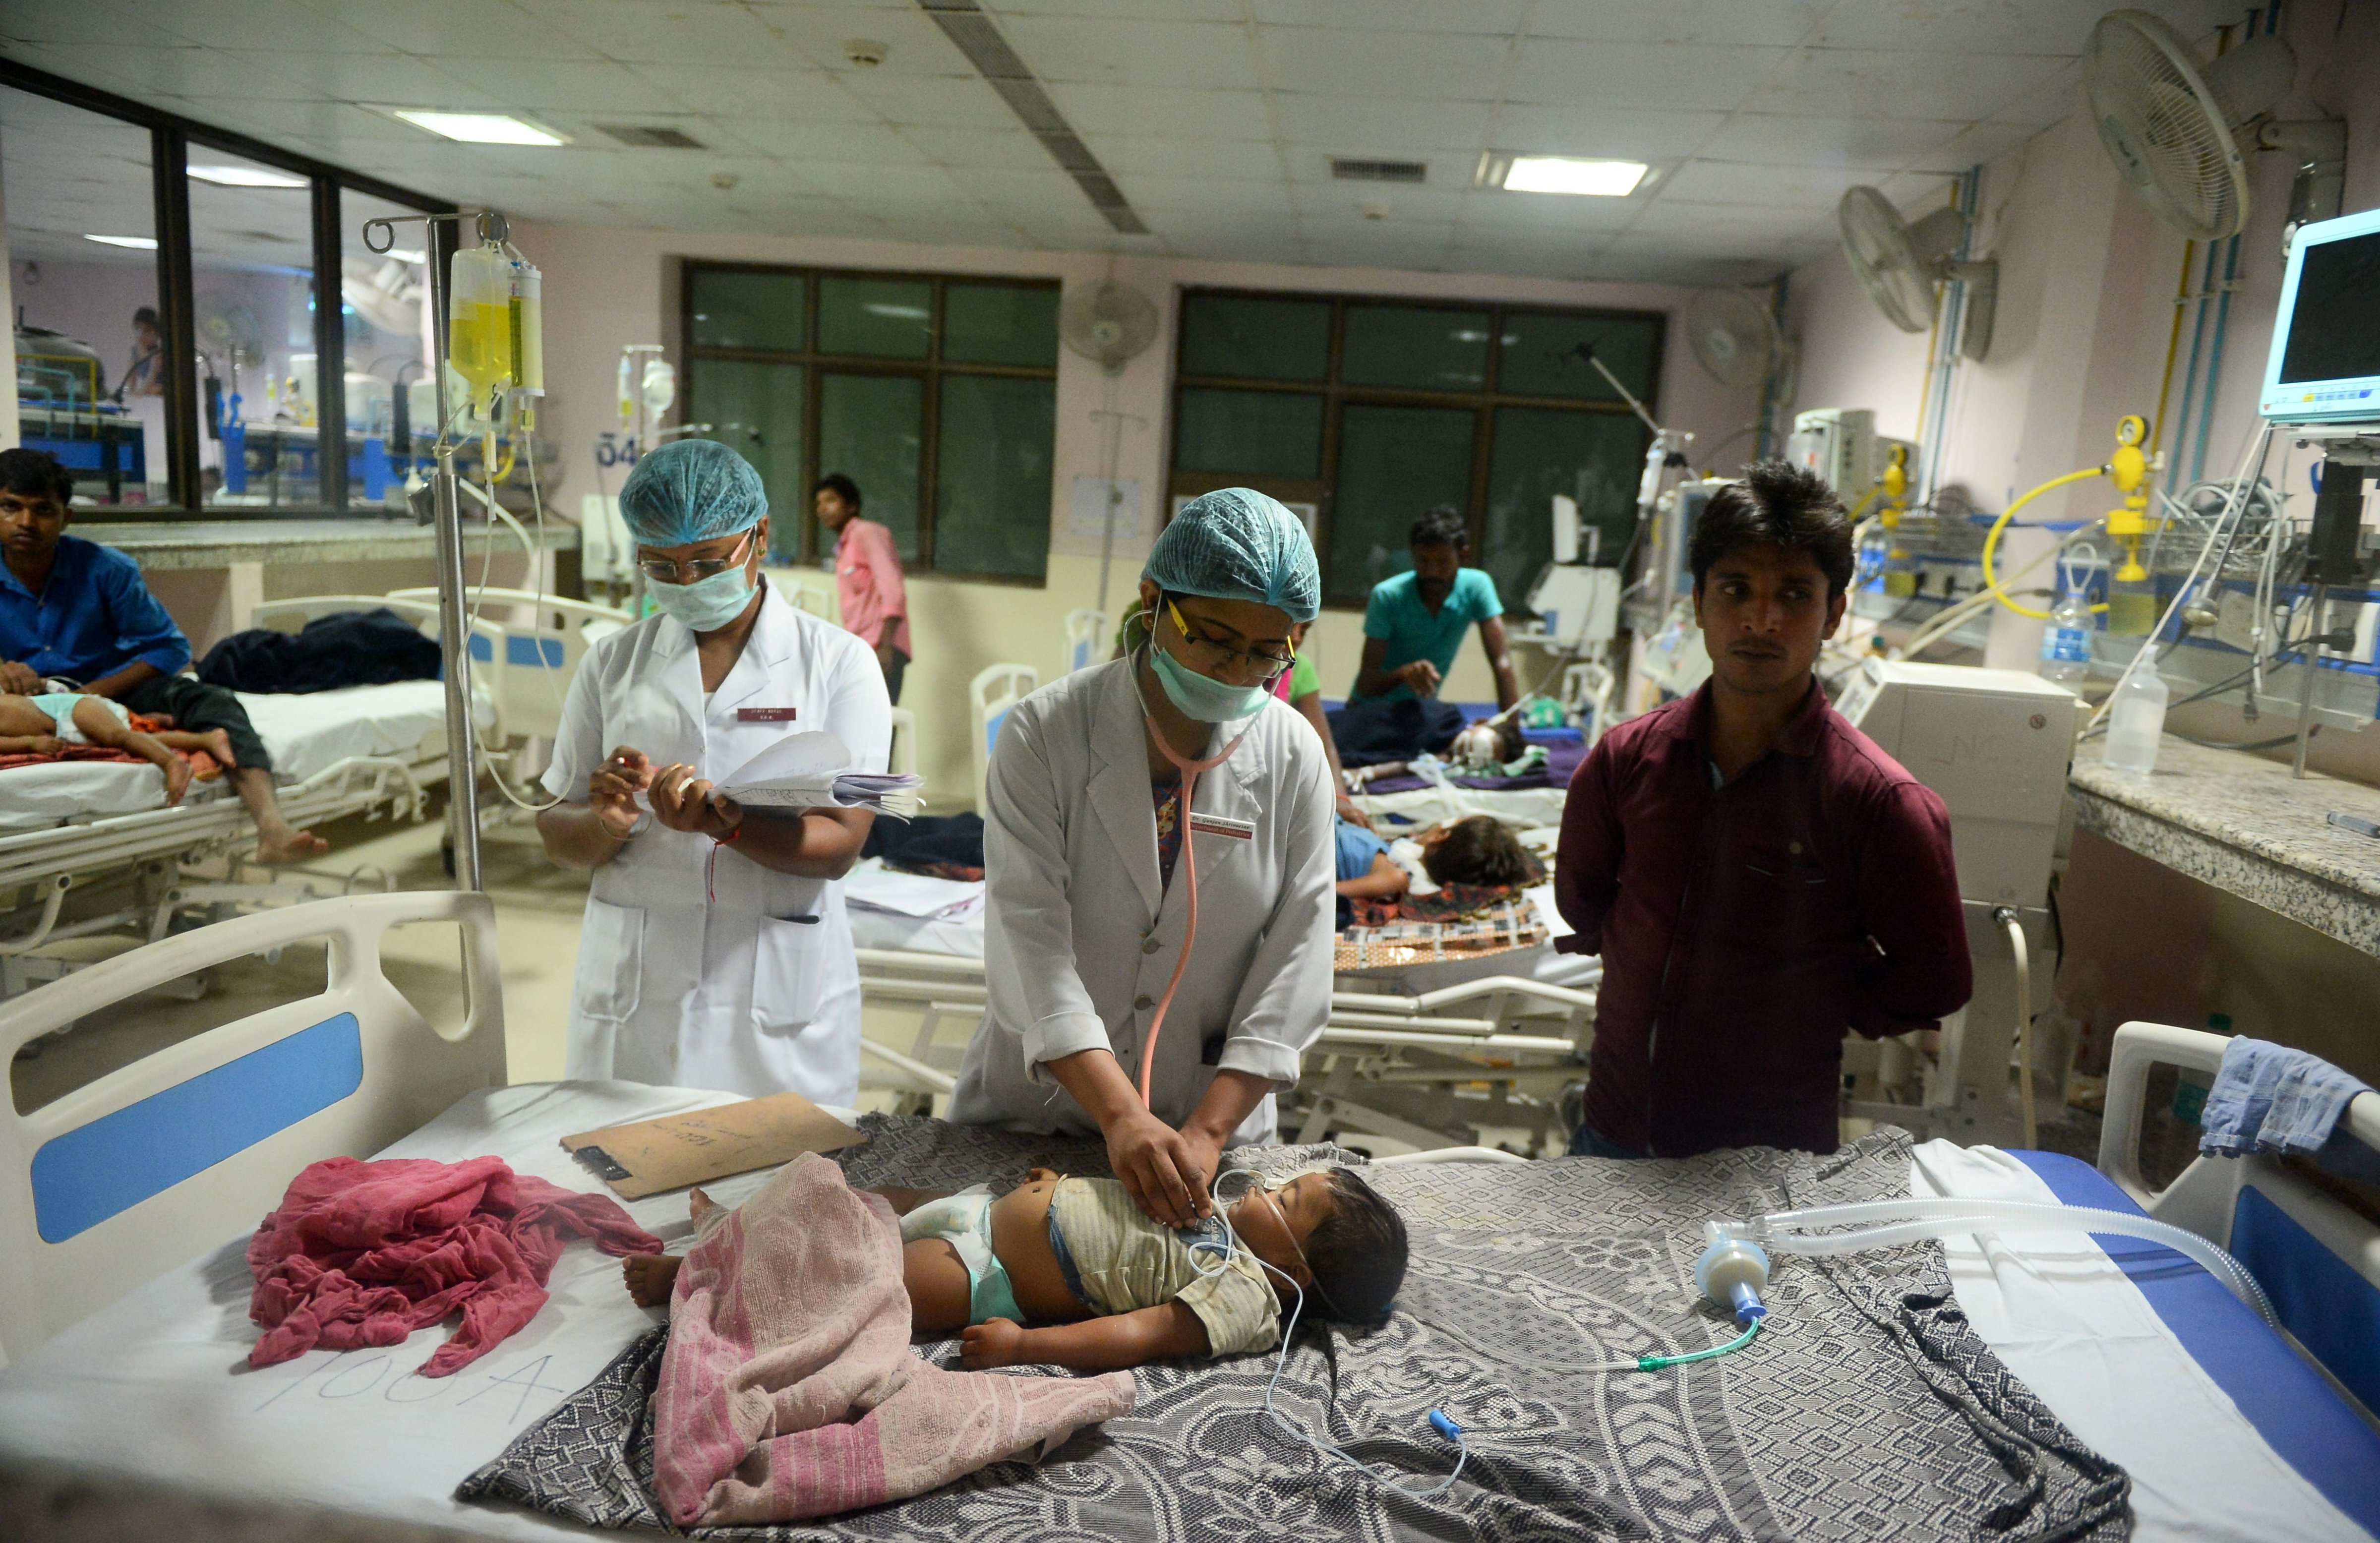 Indian medical staff attend to a child admitted in the Encephalitis ward at The Baba Raghav Das Hospital in Gorakhpur, Uttar Pradesh, on August 12, 2017. (Sanjay Kanojia—AFP/Getty Images)